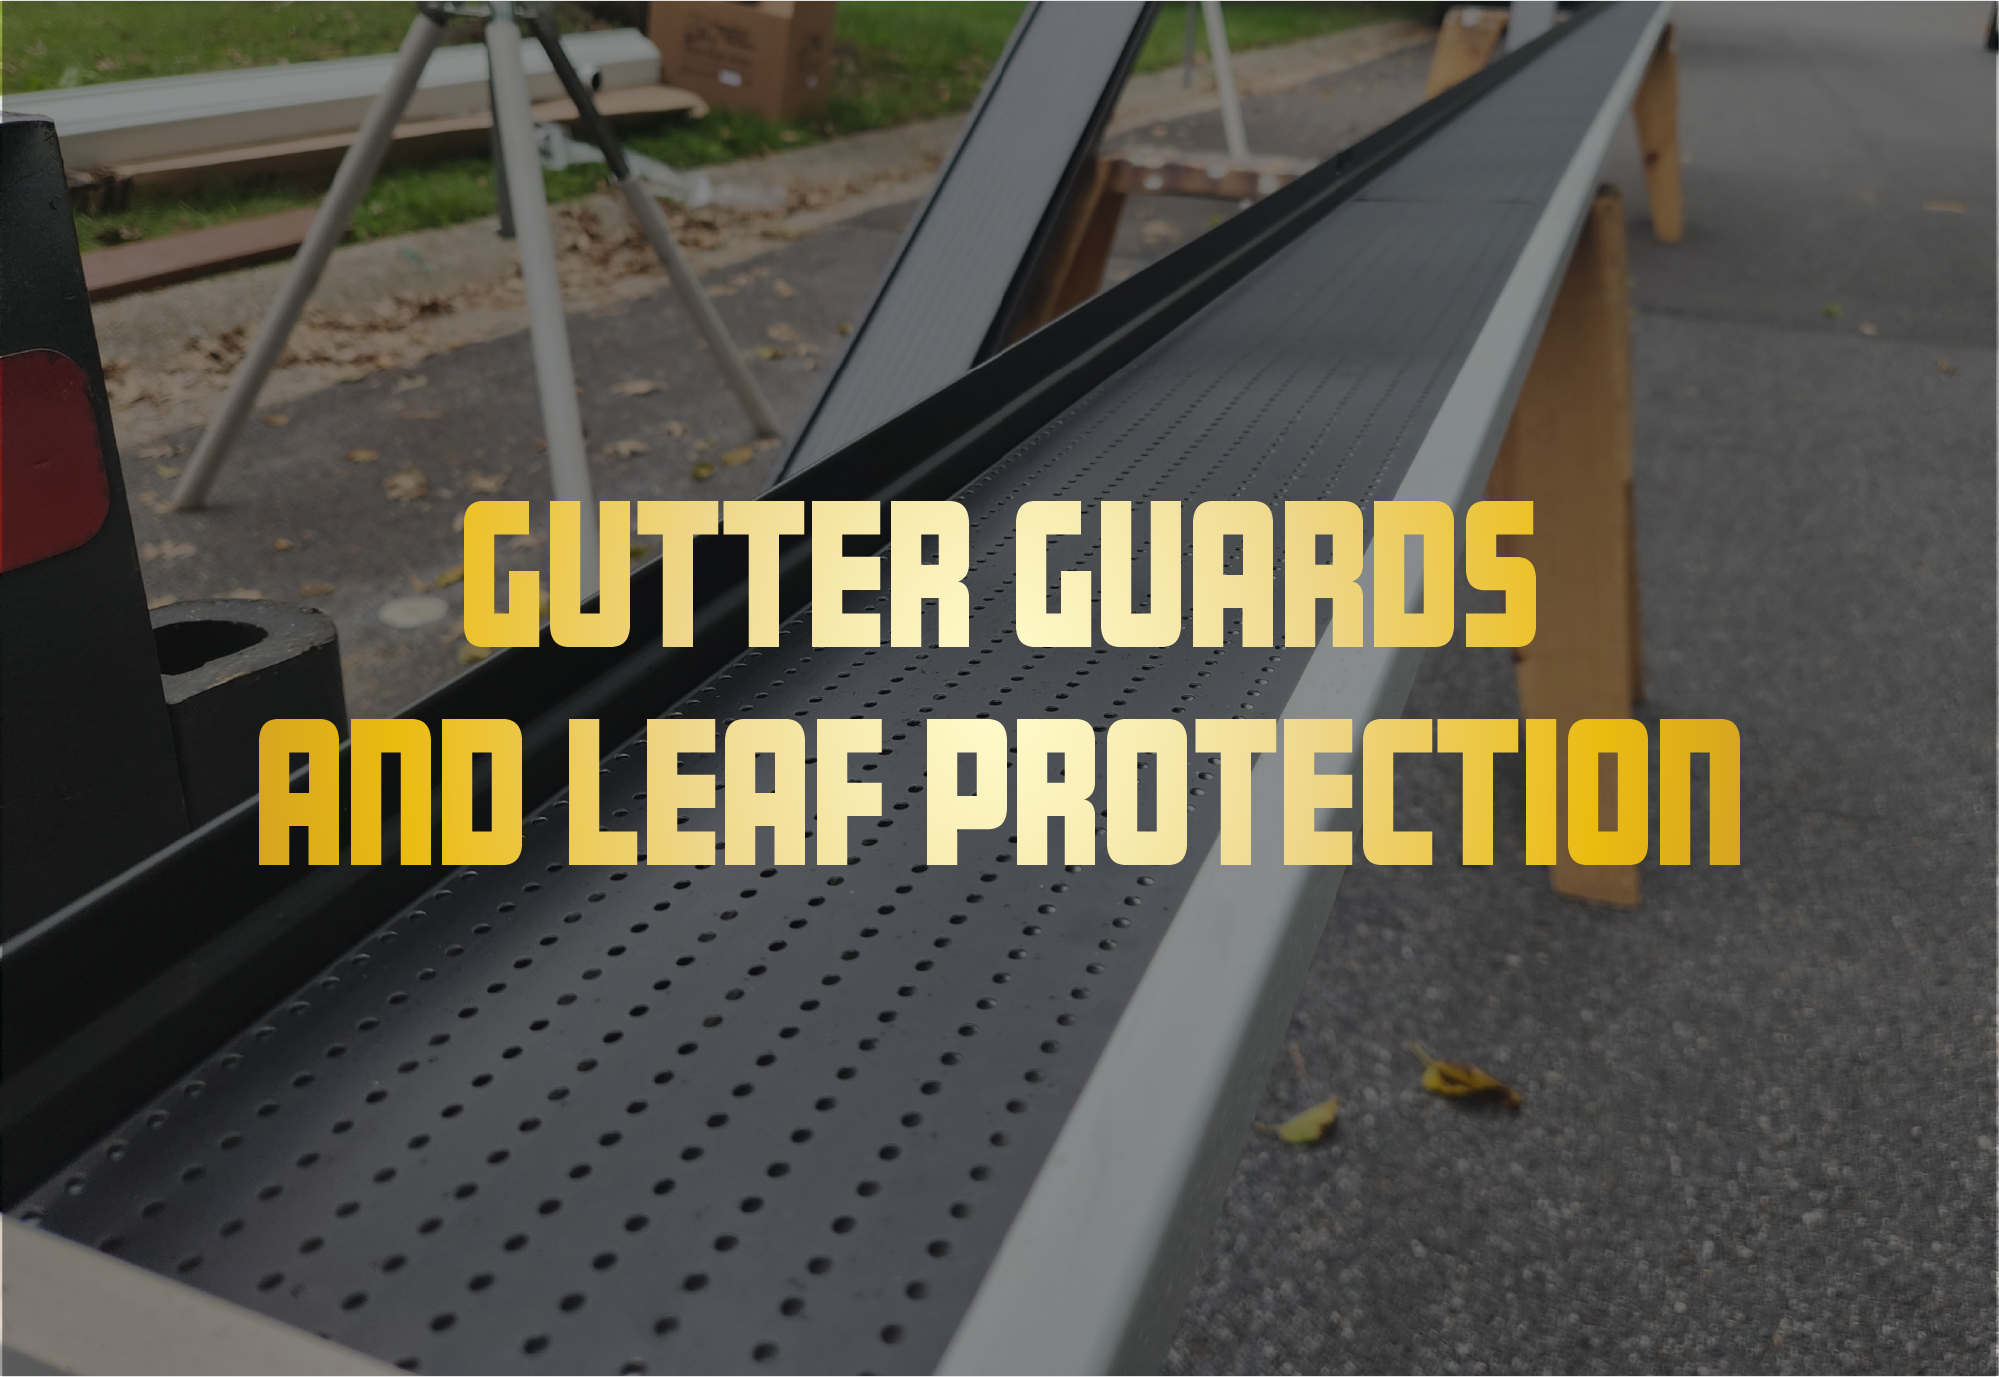 gutter guards and leaf protection page link image